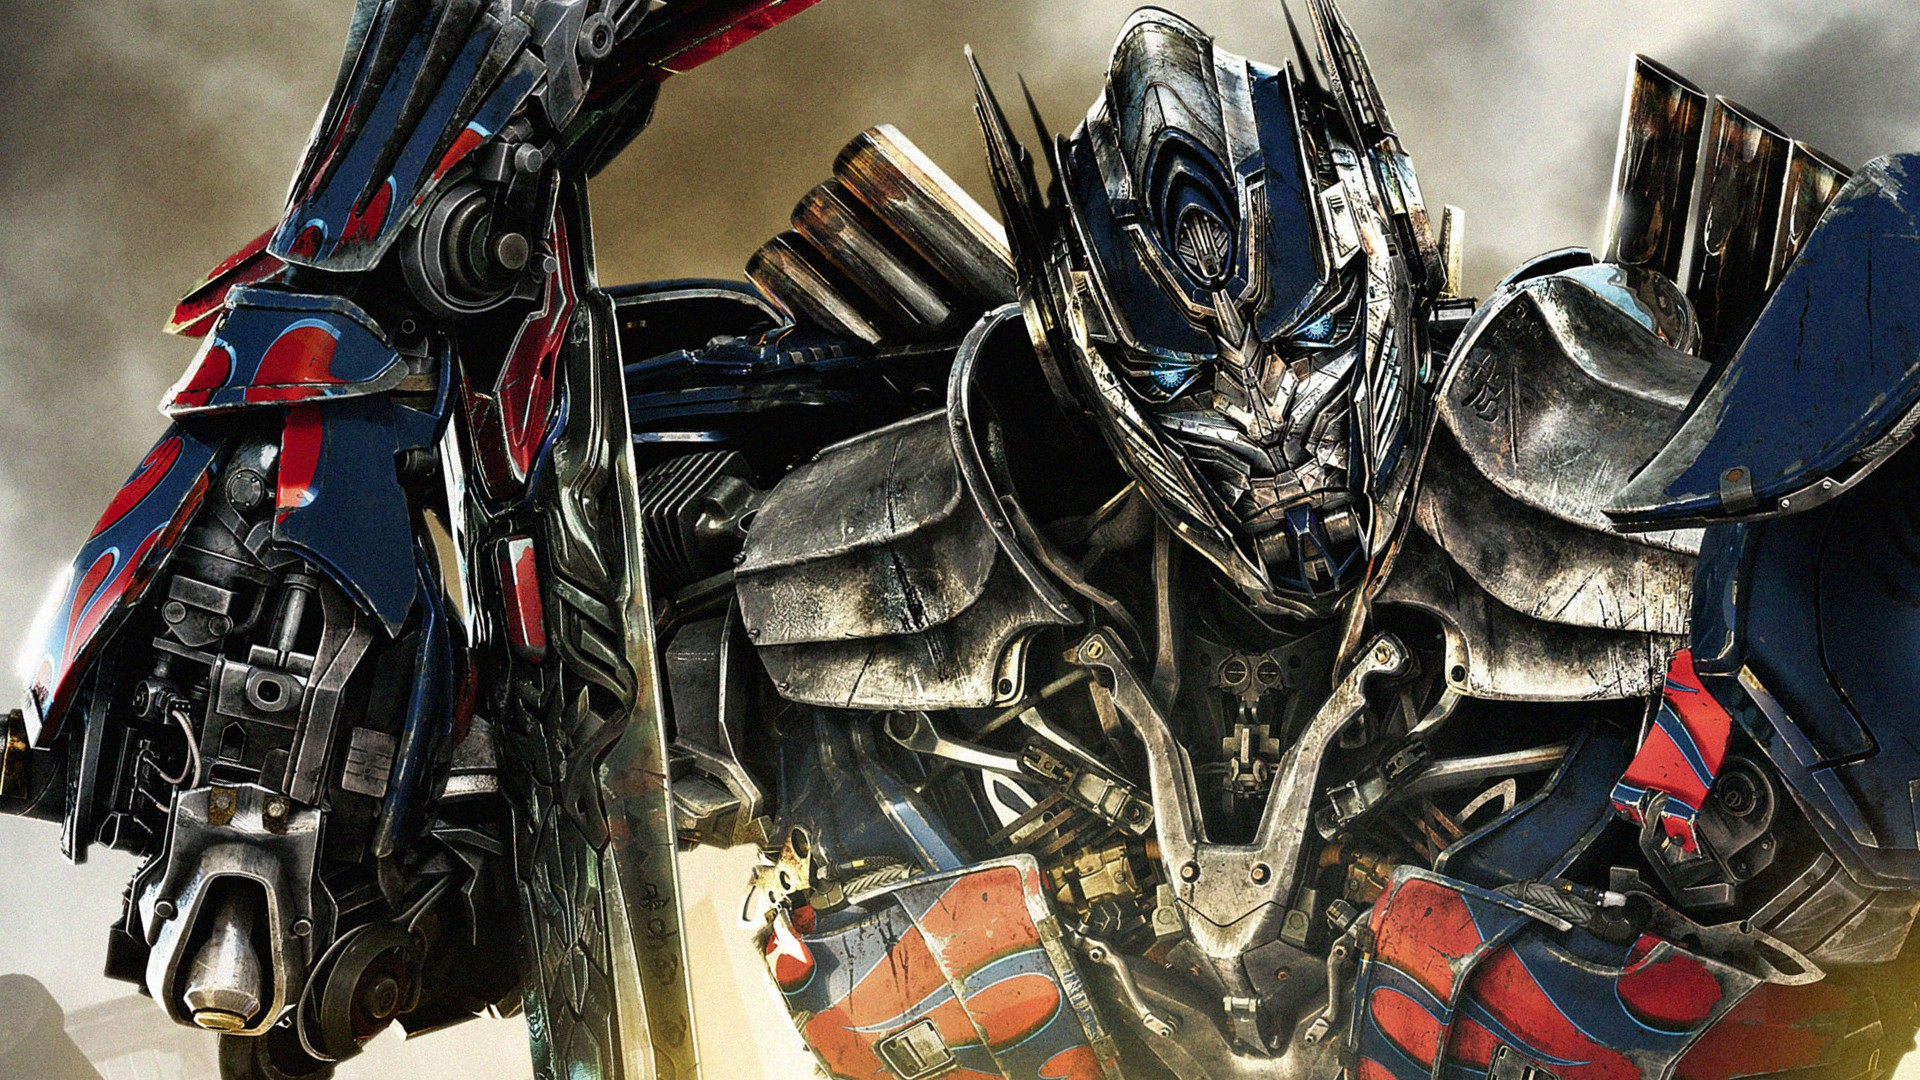 1920x1080 450+ Transformers HD Wallpapers and Backgrounds